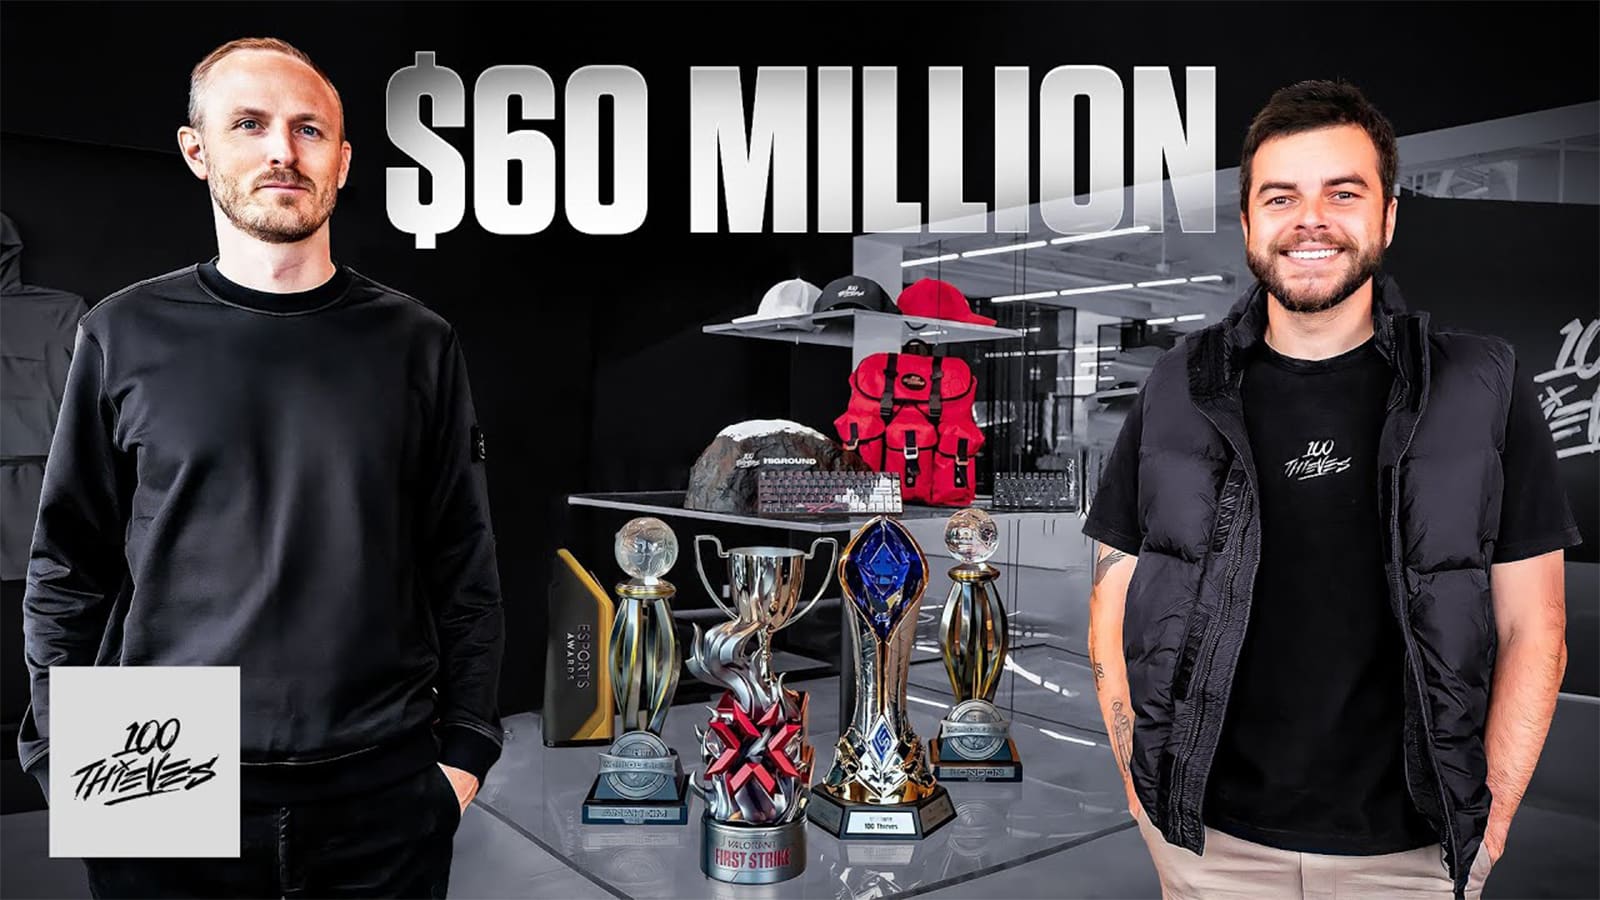 100 Thieves Series C Investment